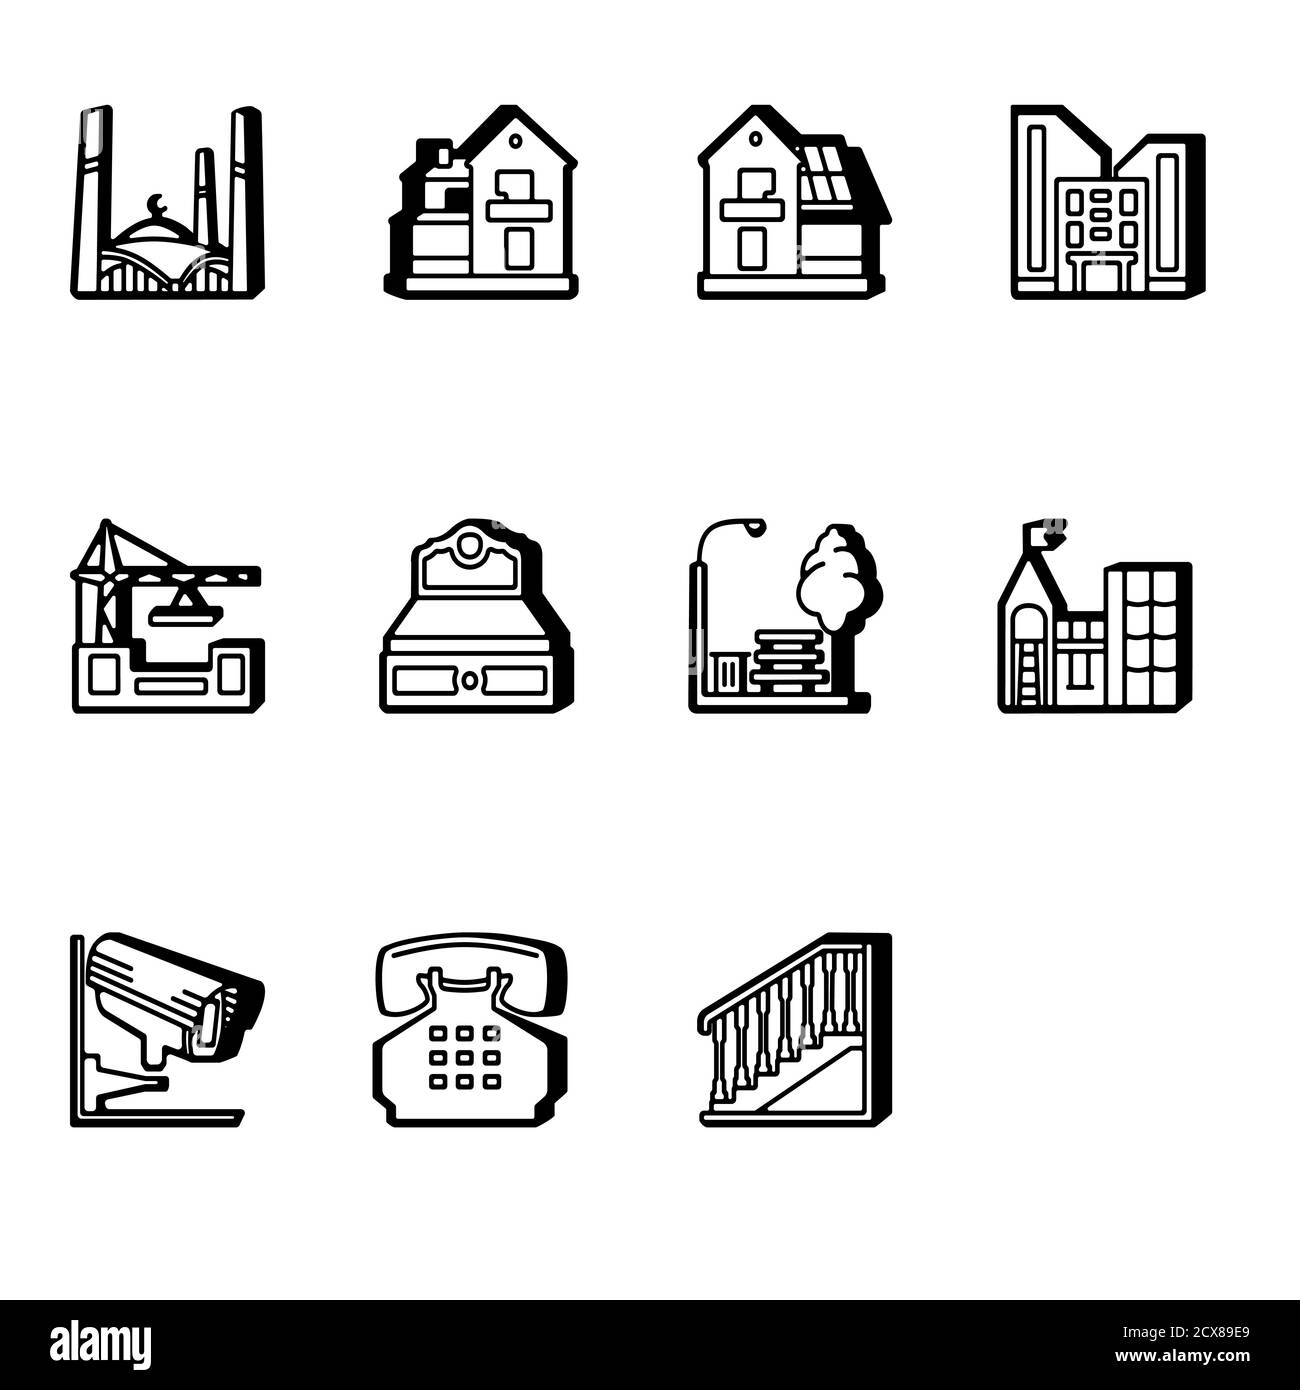 Set of icons building 2 Stock Vector